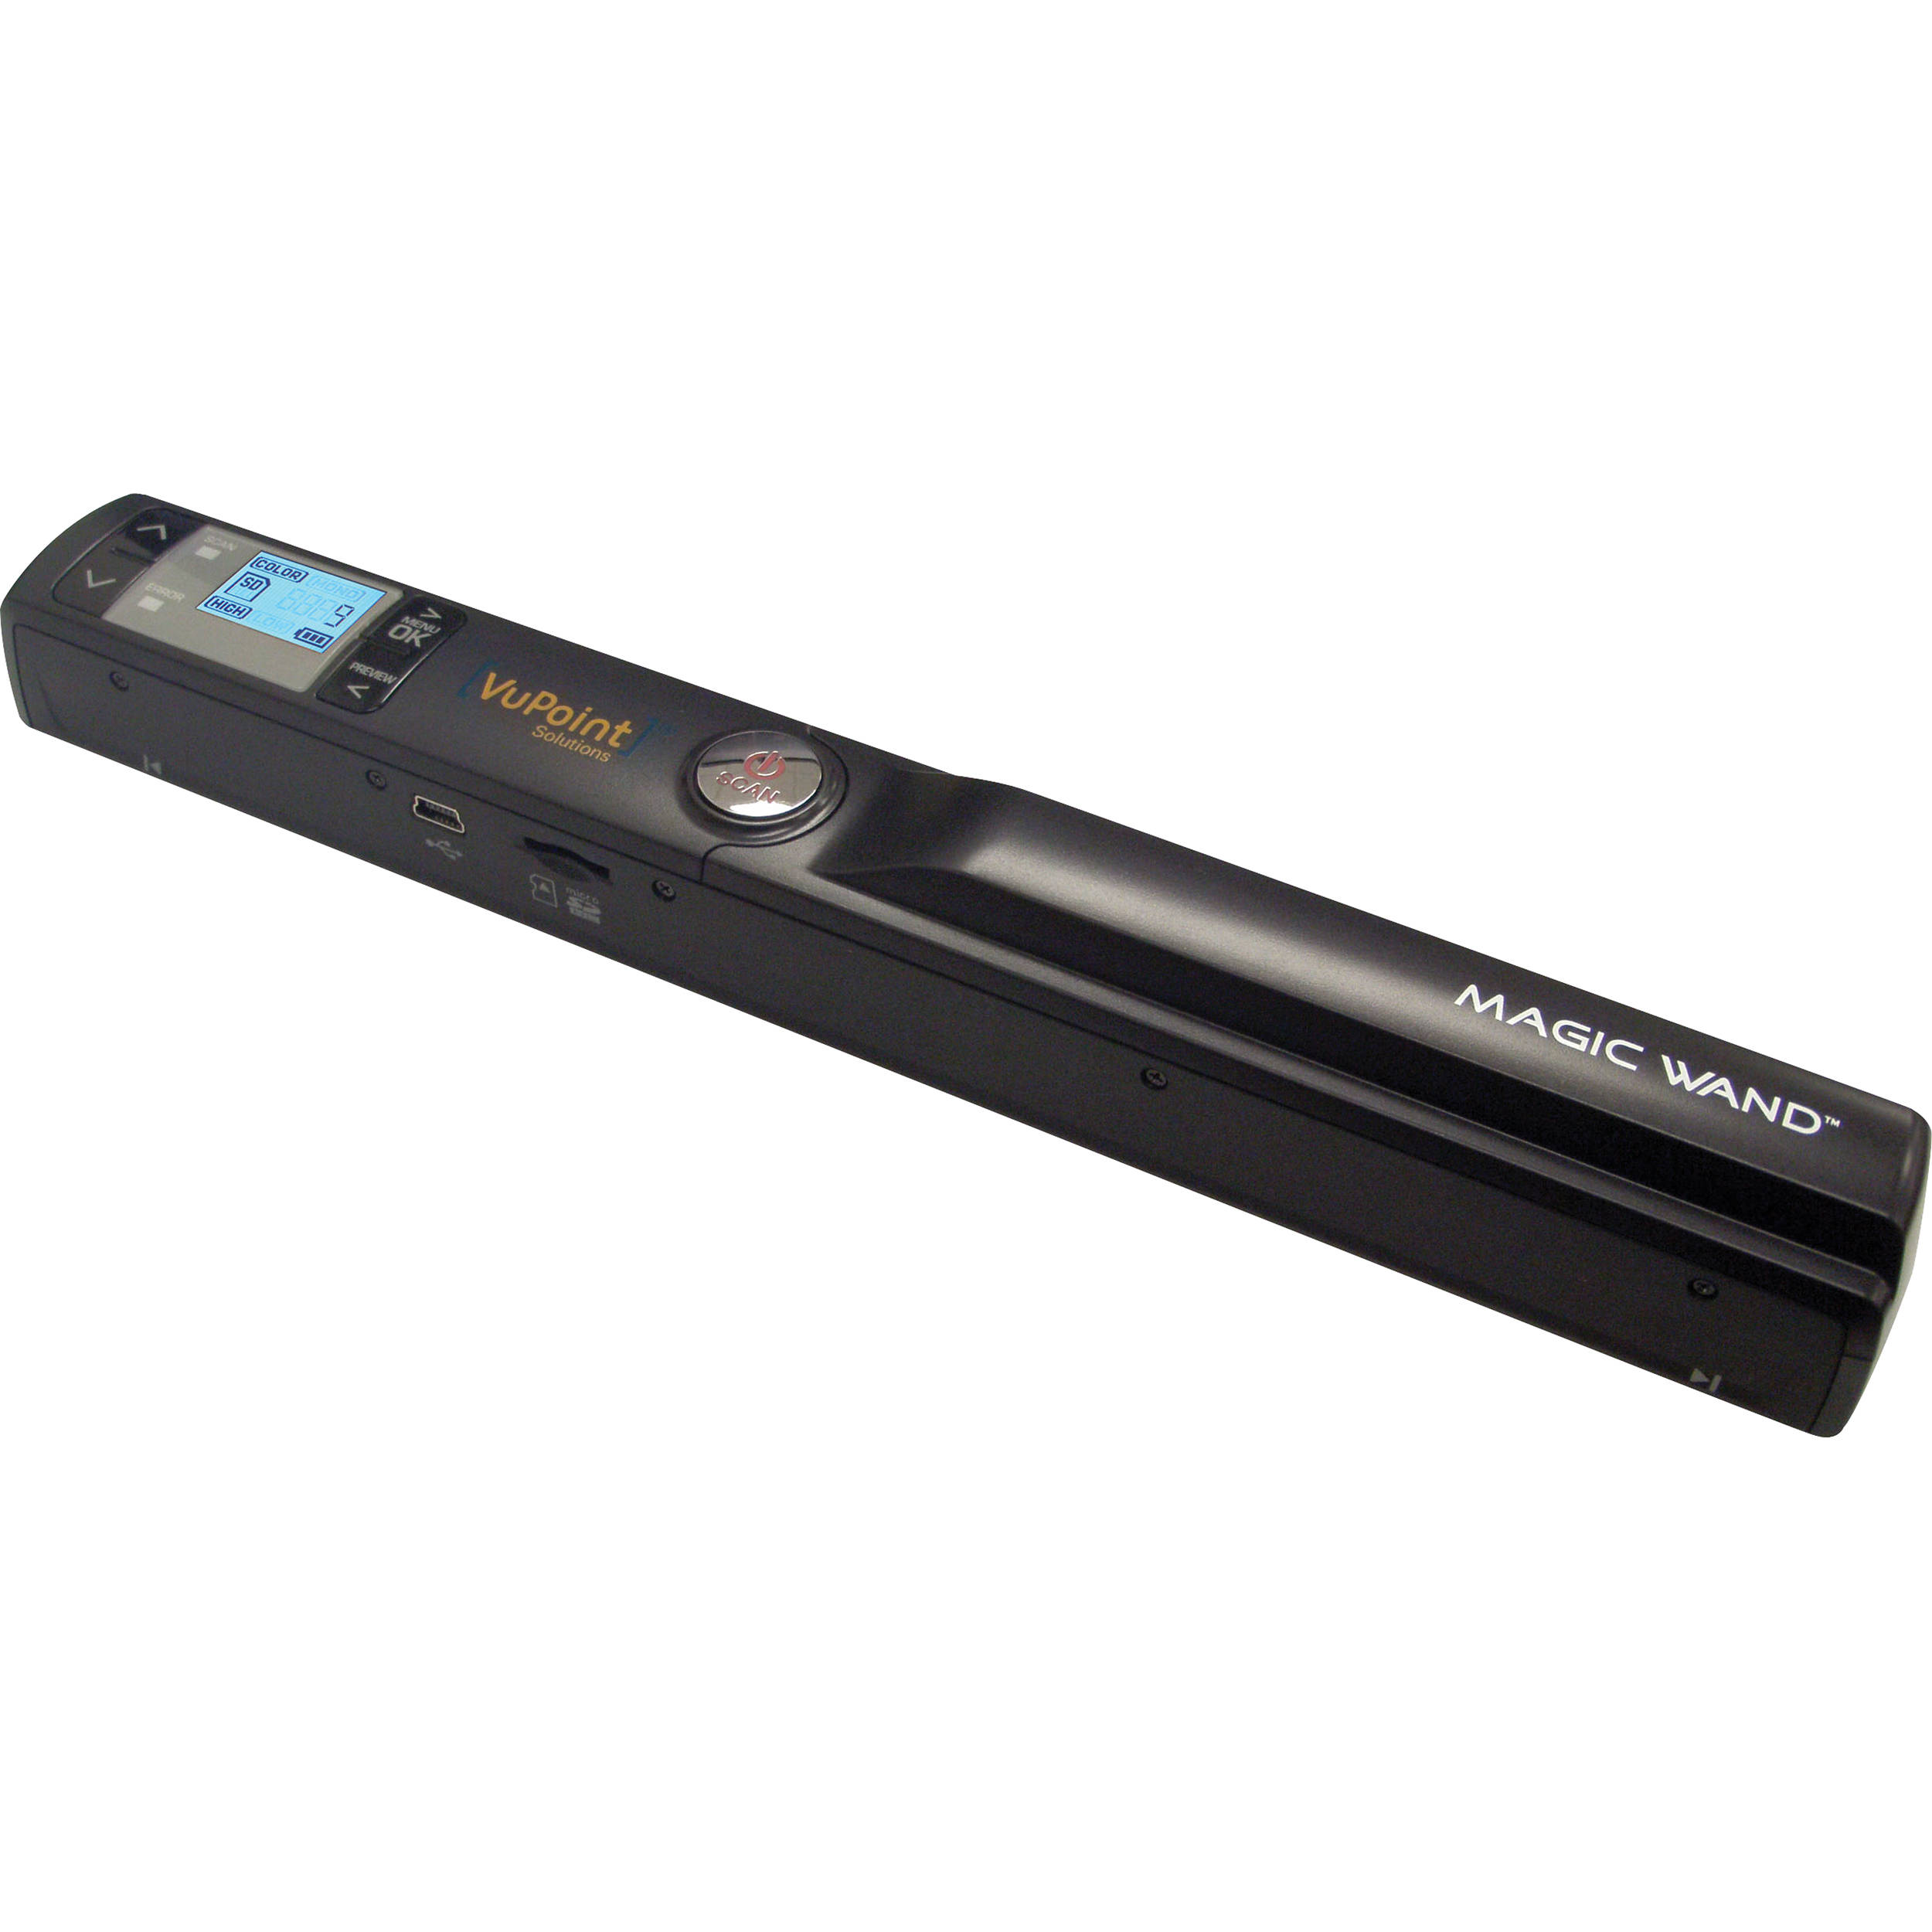 iscan wand portable scanner manual